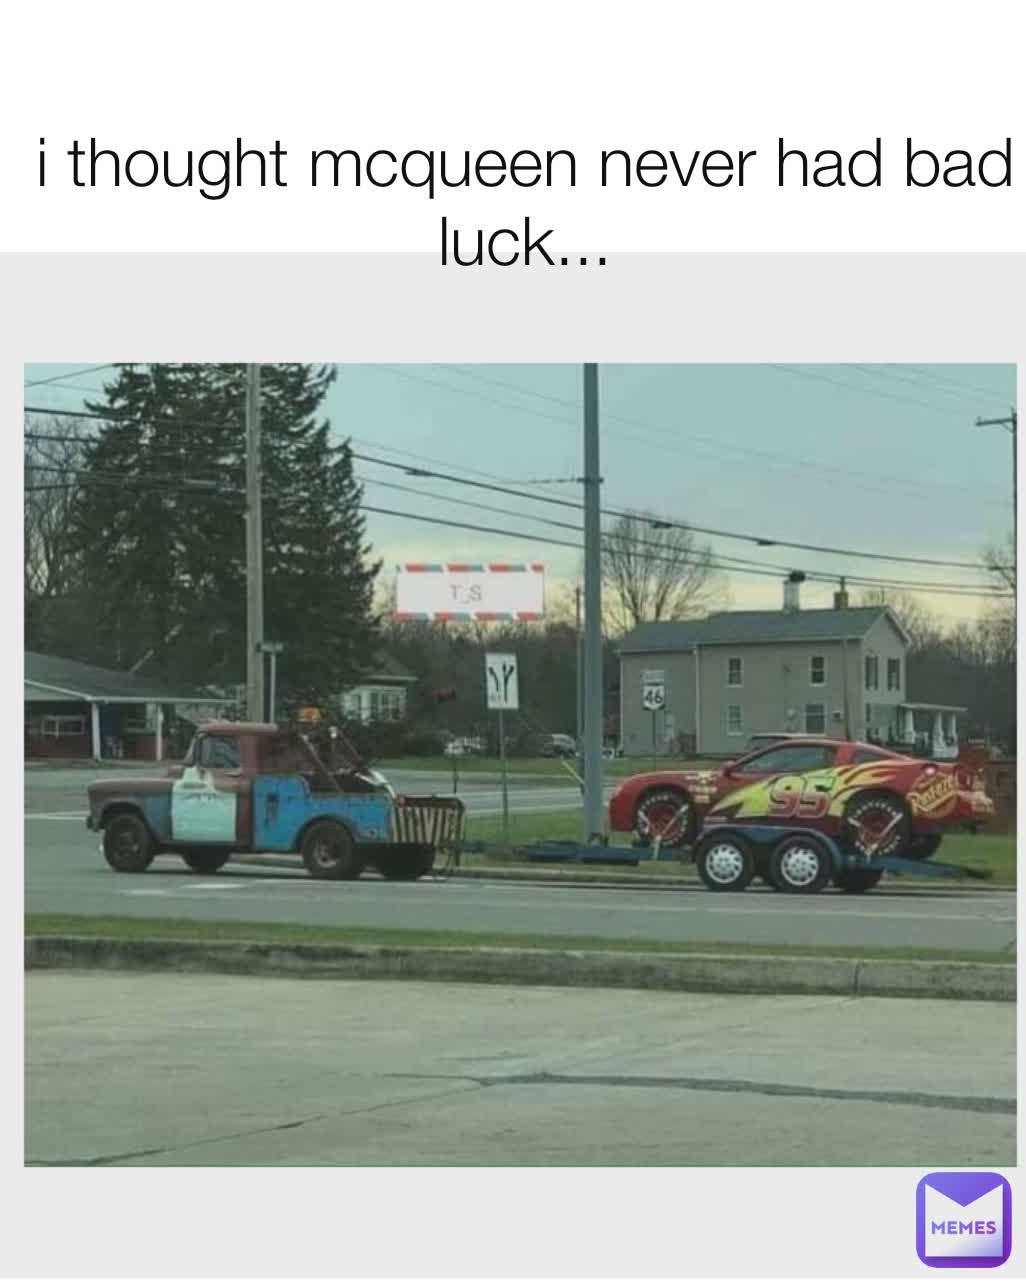 i thought mcqueen never had bad luck...